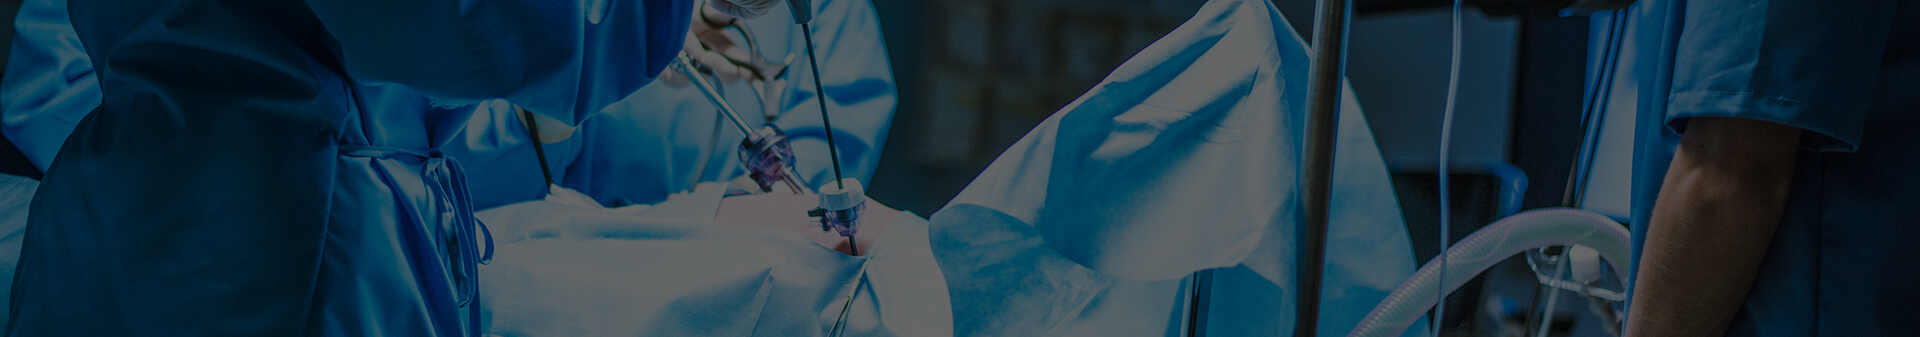 Surgery banner image